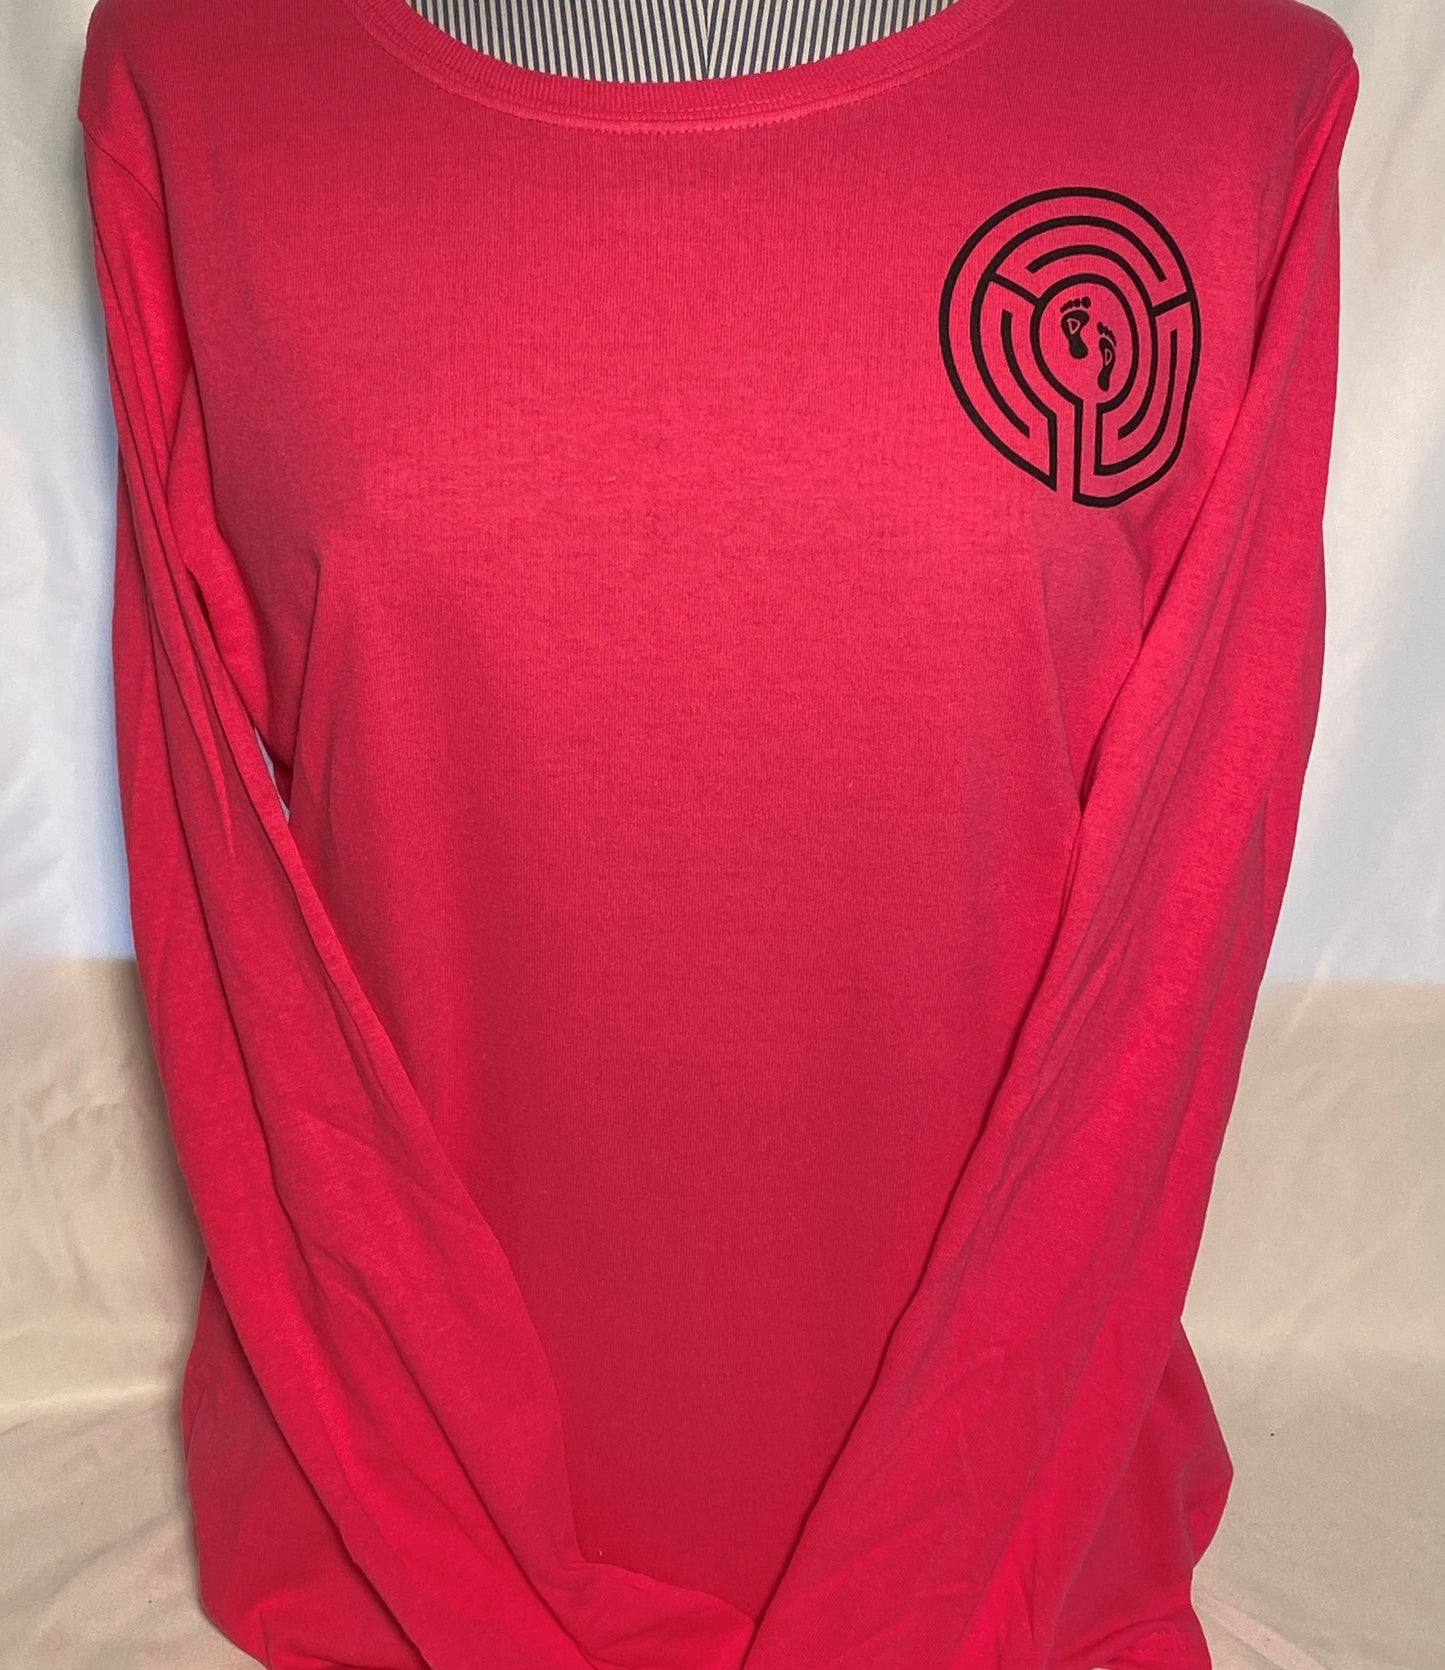 Ladies Long-sleeved T-shirt, red